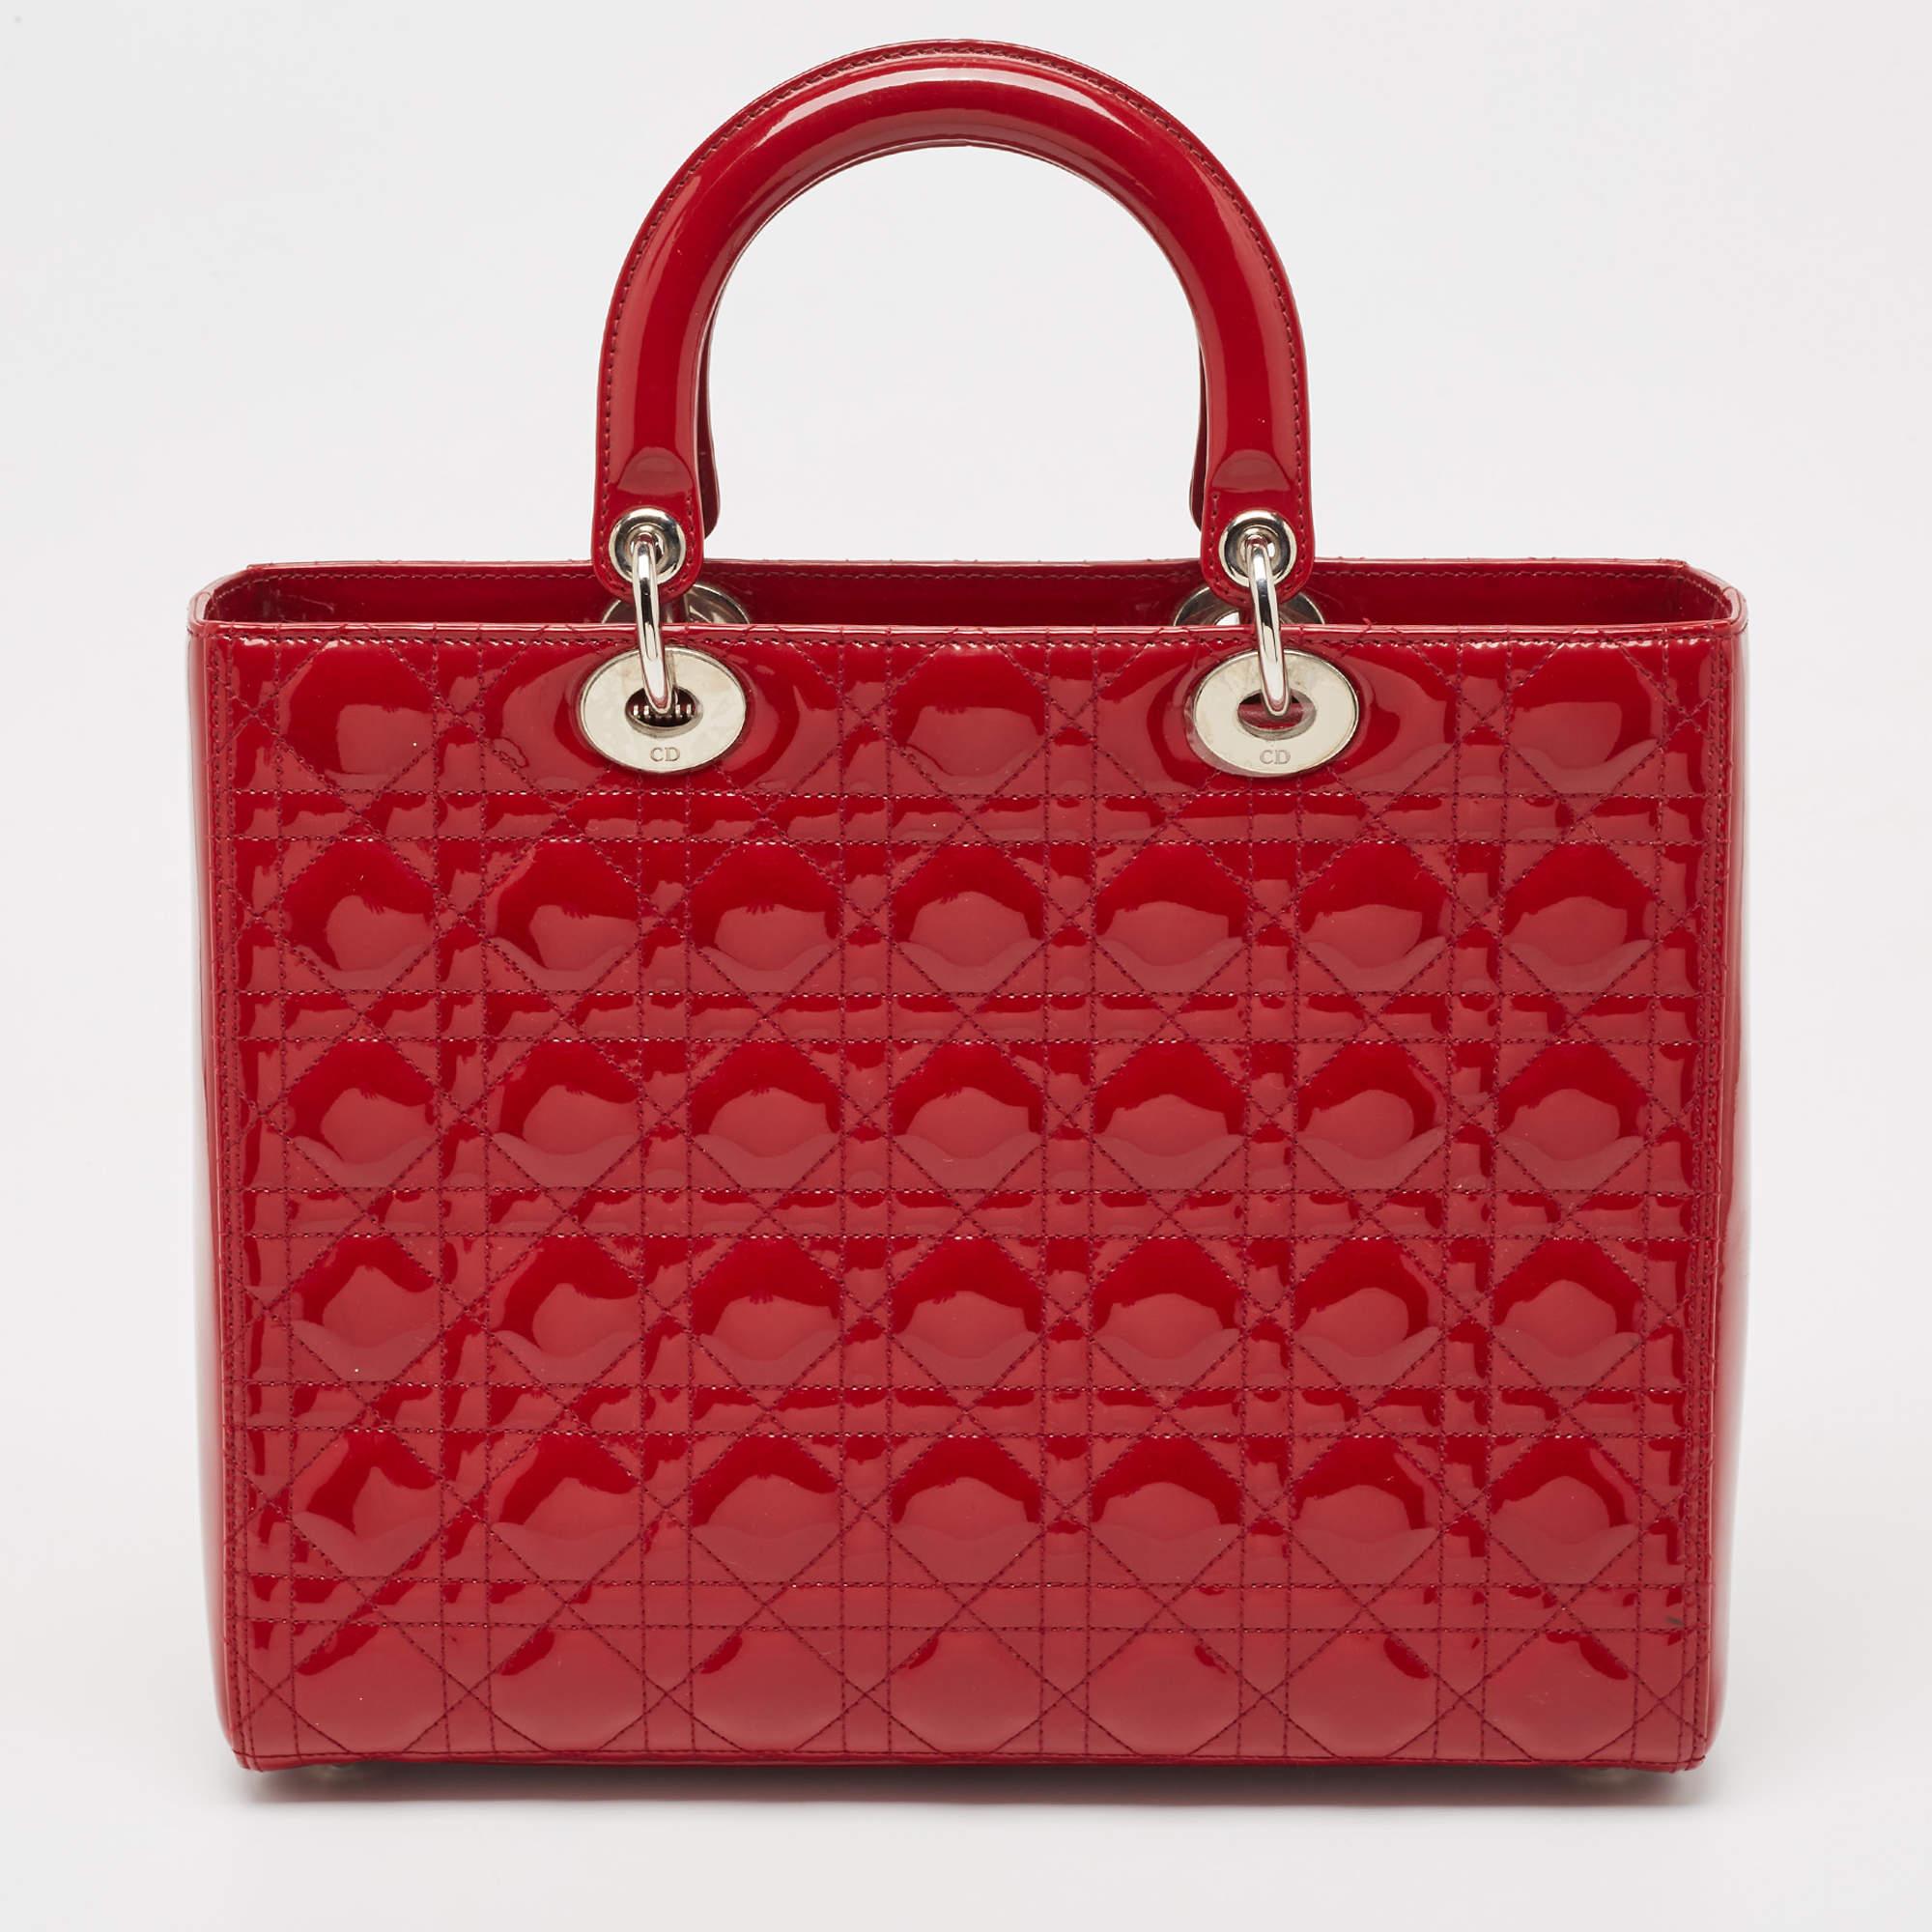 Dior Red Cannage Patent Leather Large Lady Dior Tote In Fair Condition For Sale In Dubai, Al Qouz 2